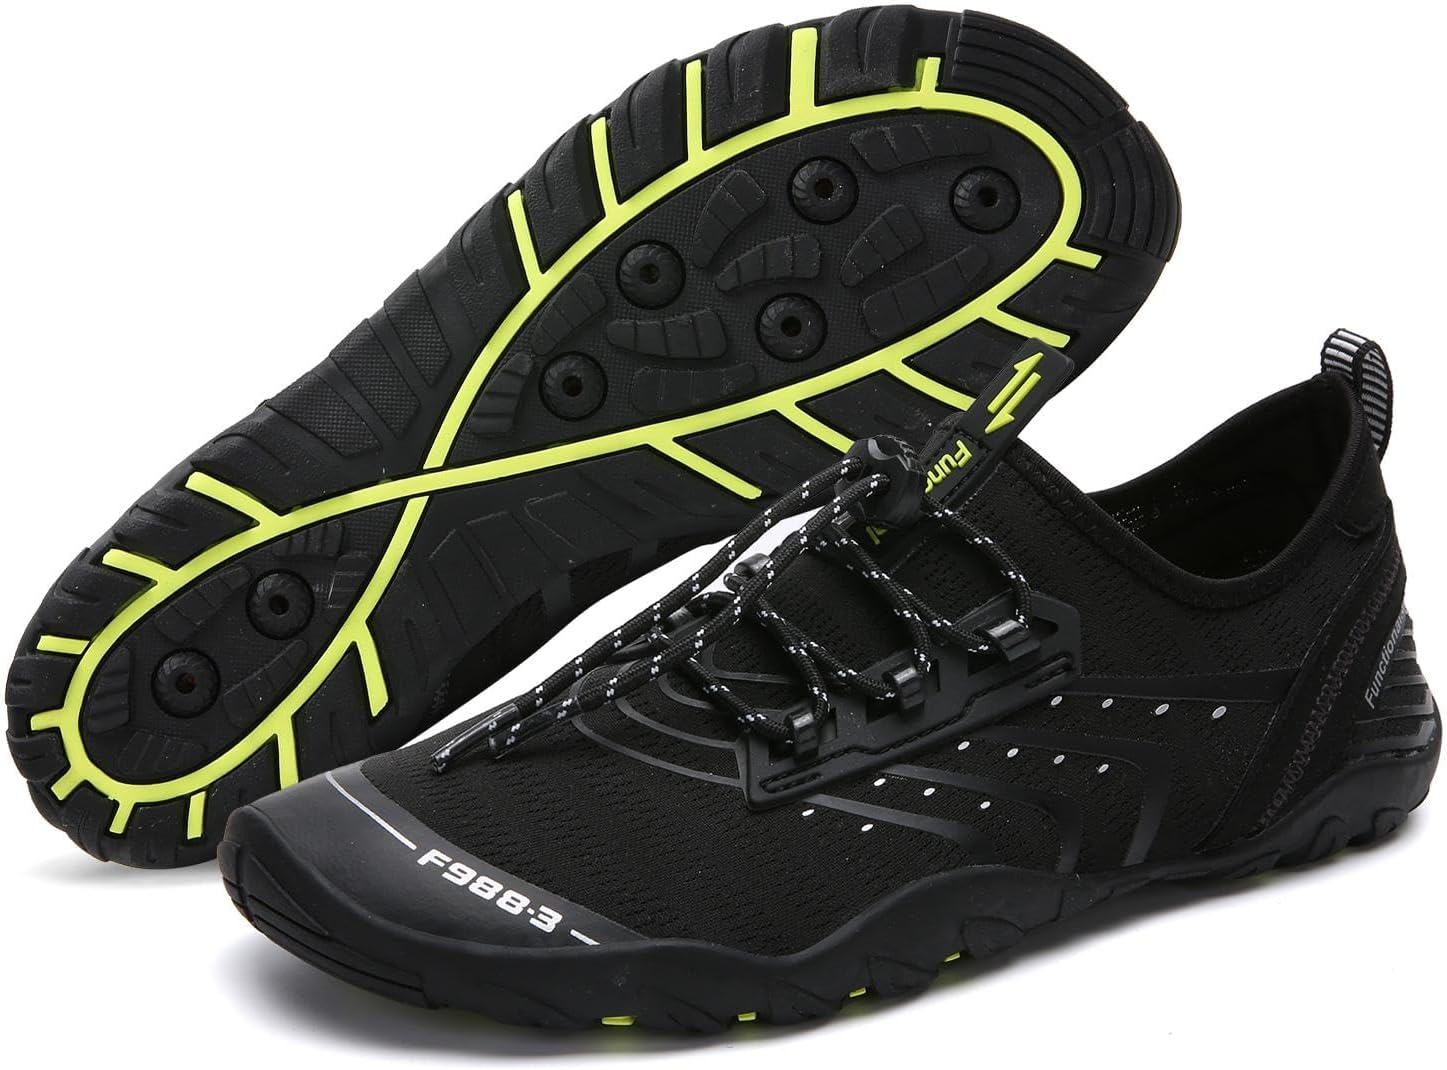 SAGUARO Water Shoes Review